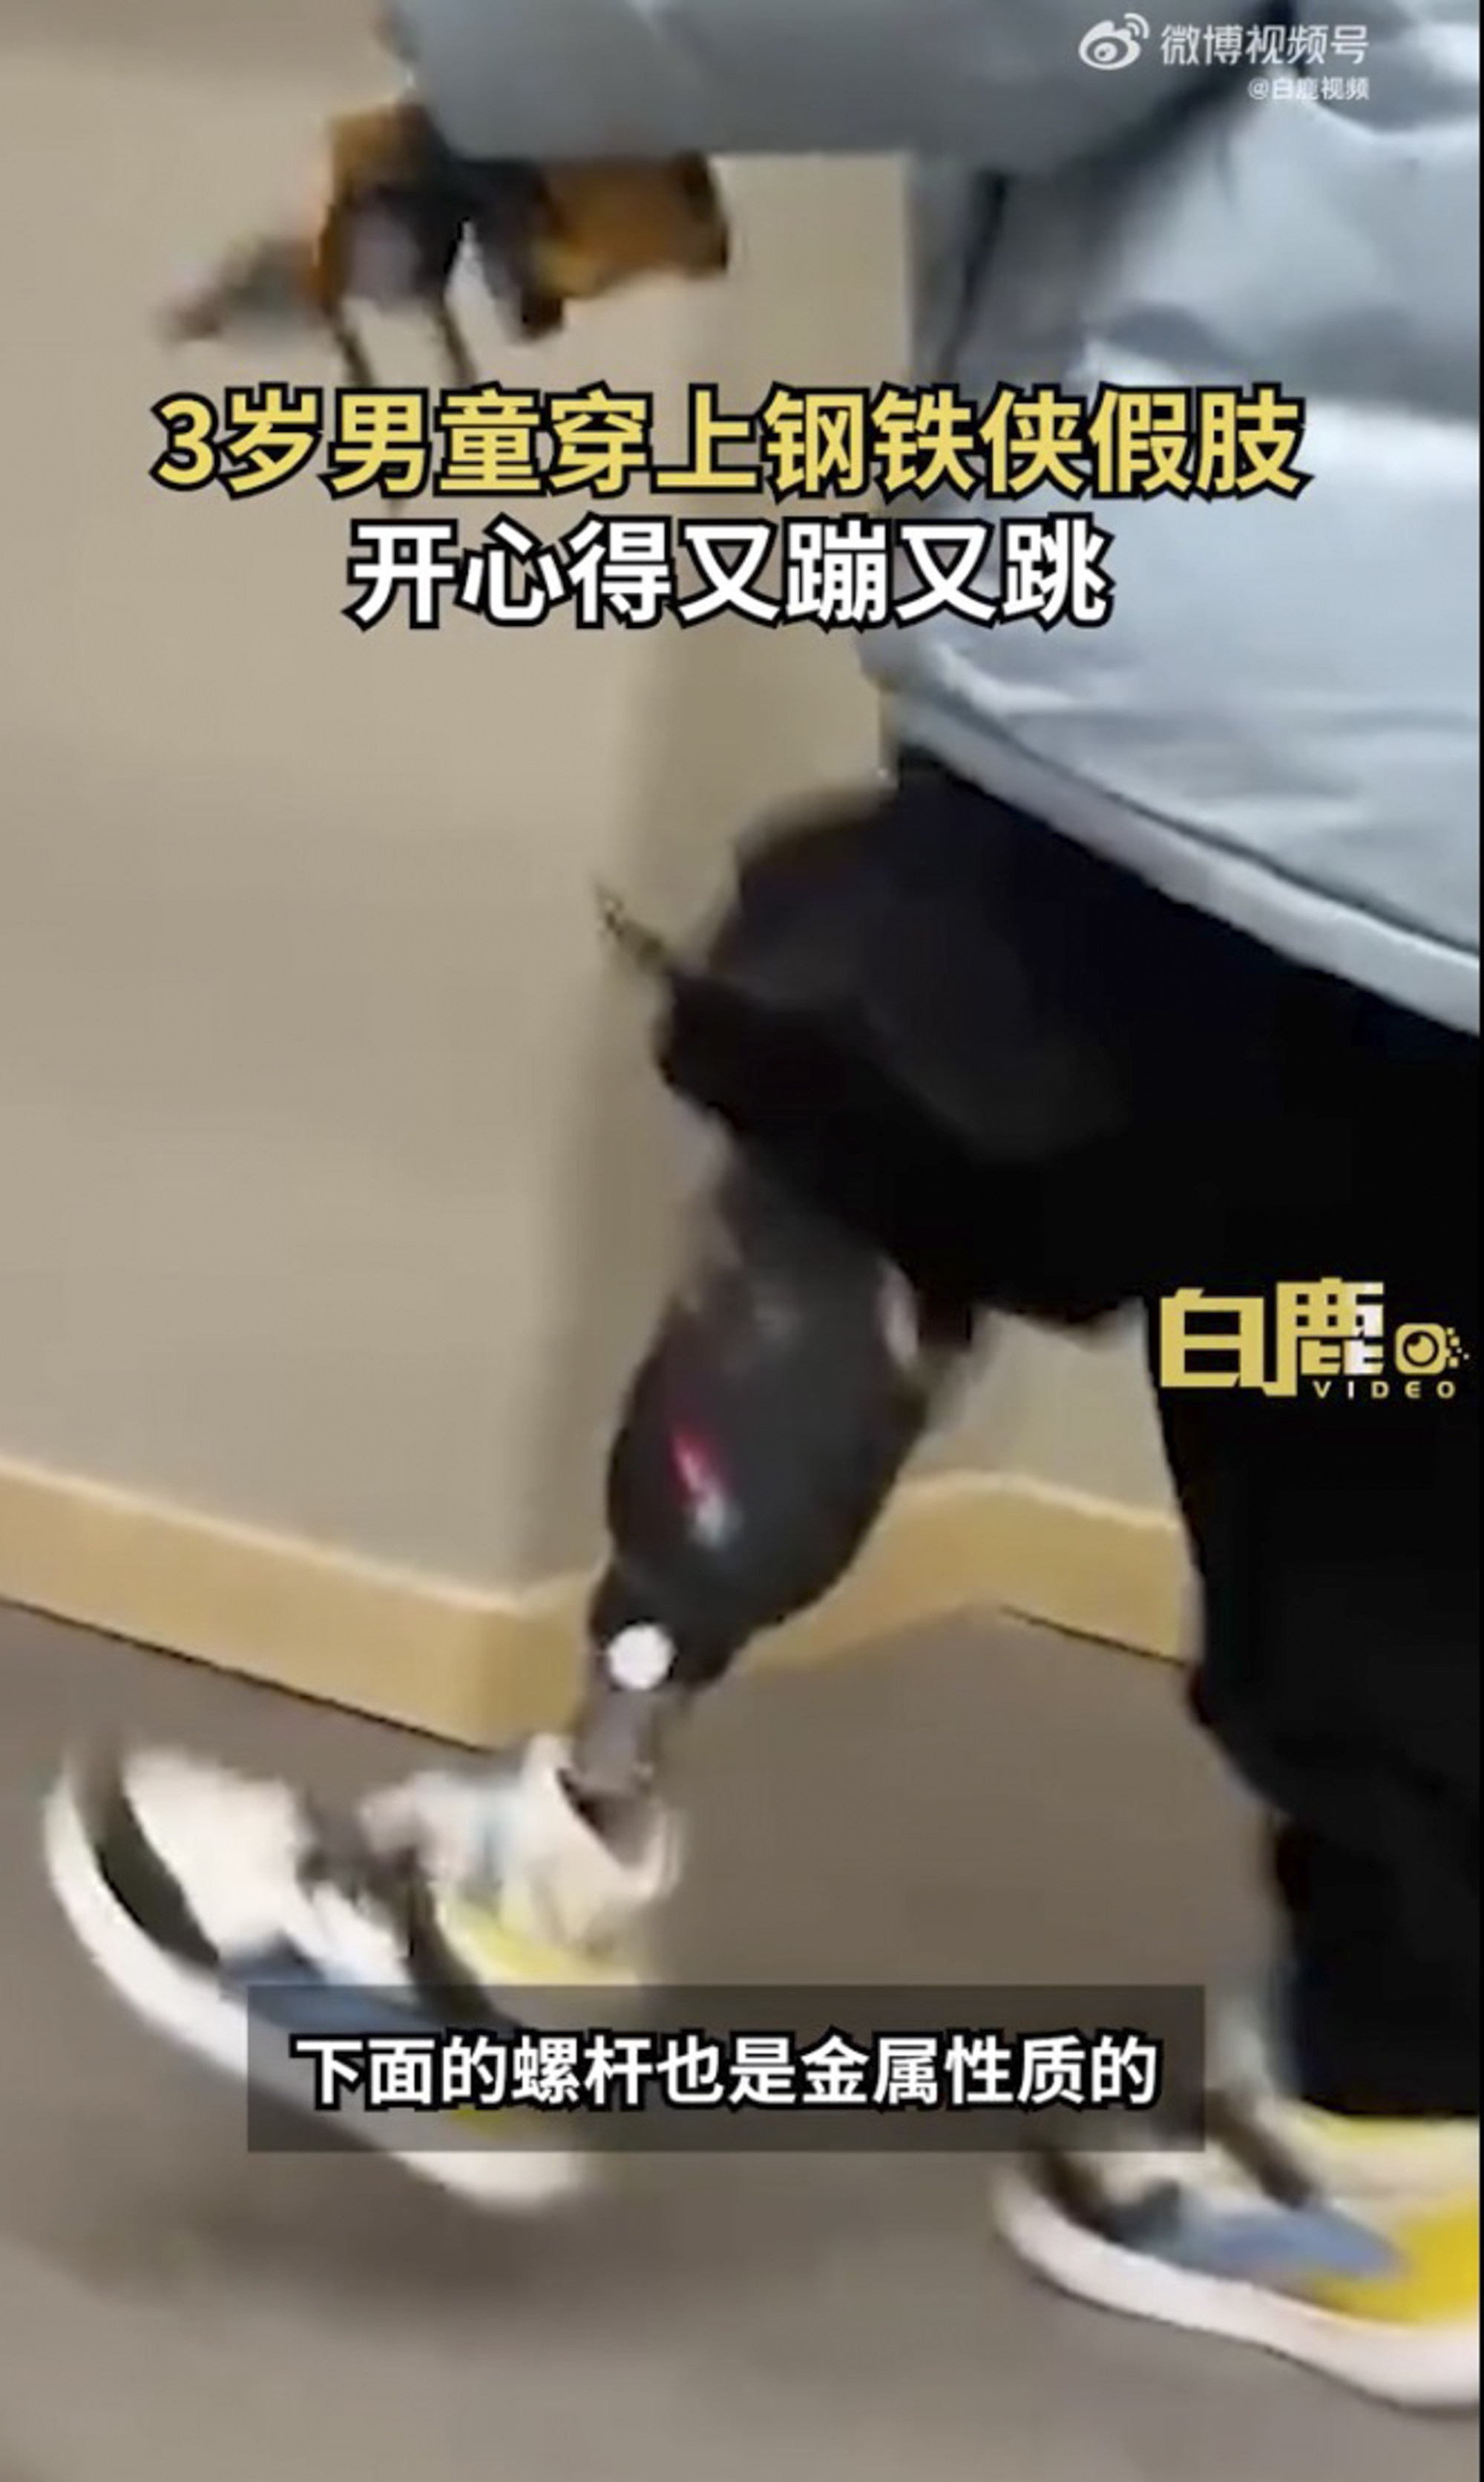 Little Yicheng, who lost his leg in traffic accident, runs towards his parents wearing his new custom-made prosthetic “Iron Man” leg. Photo: Weibo